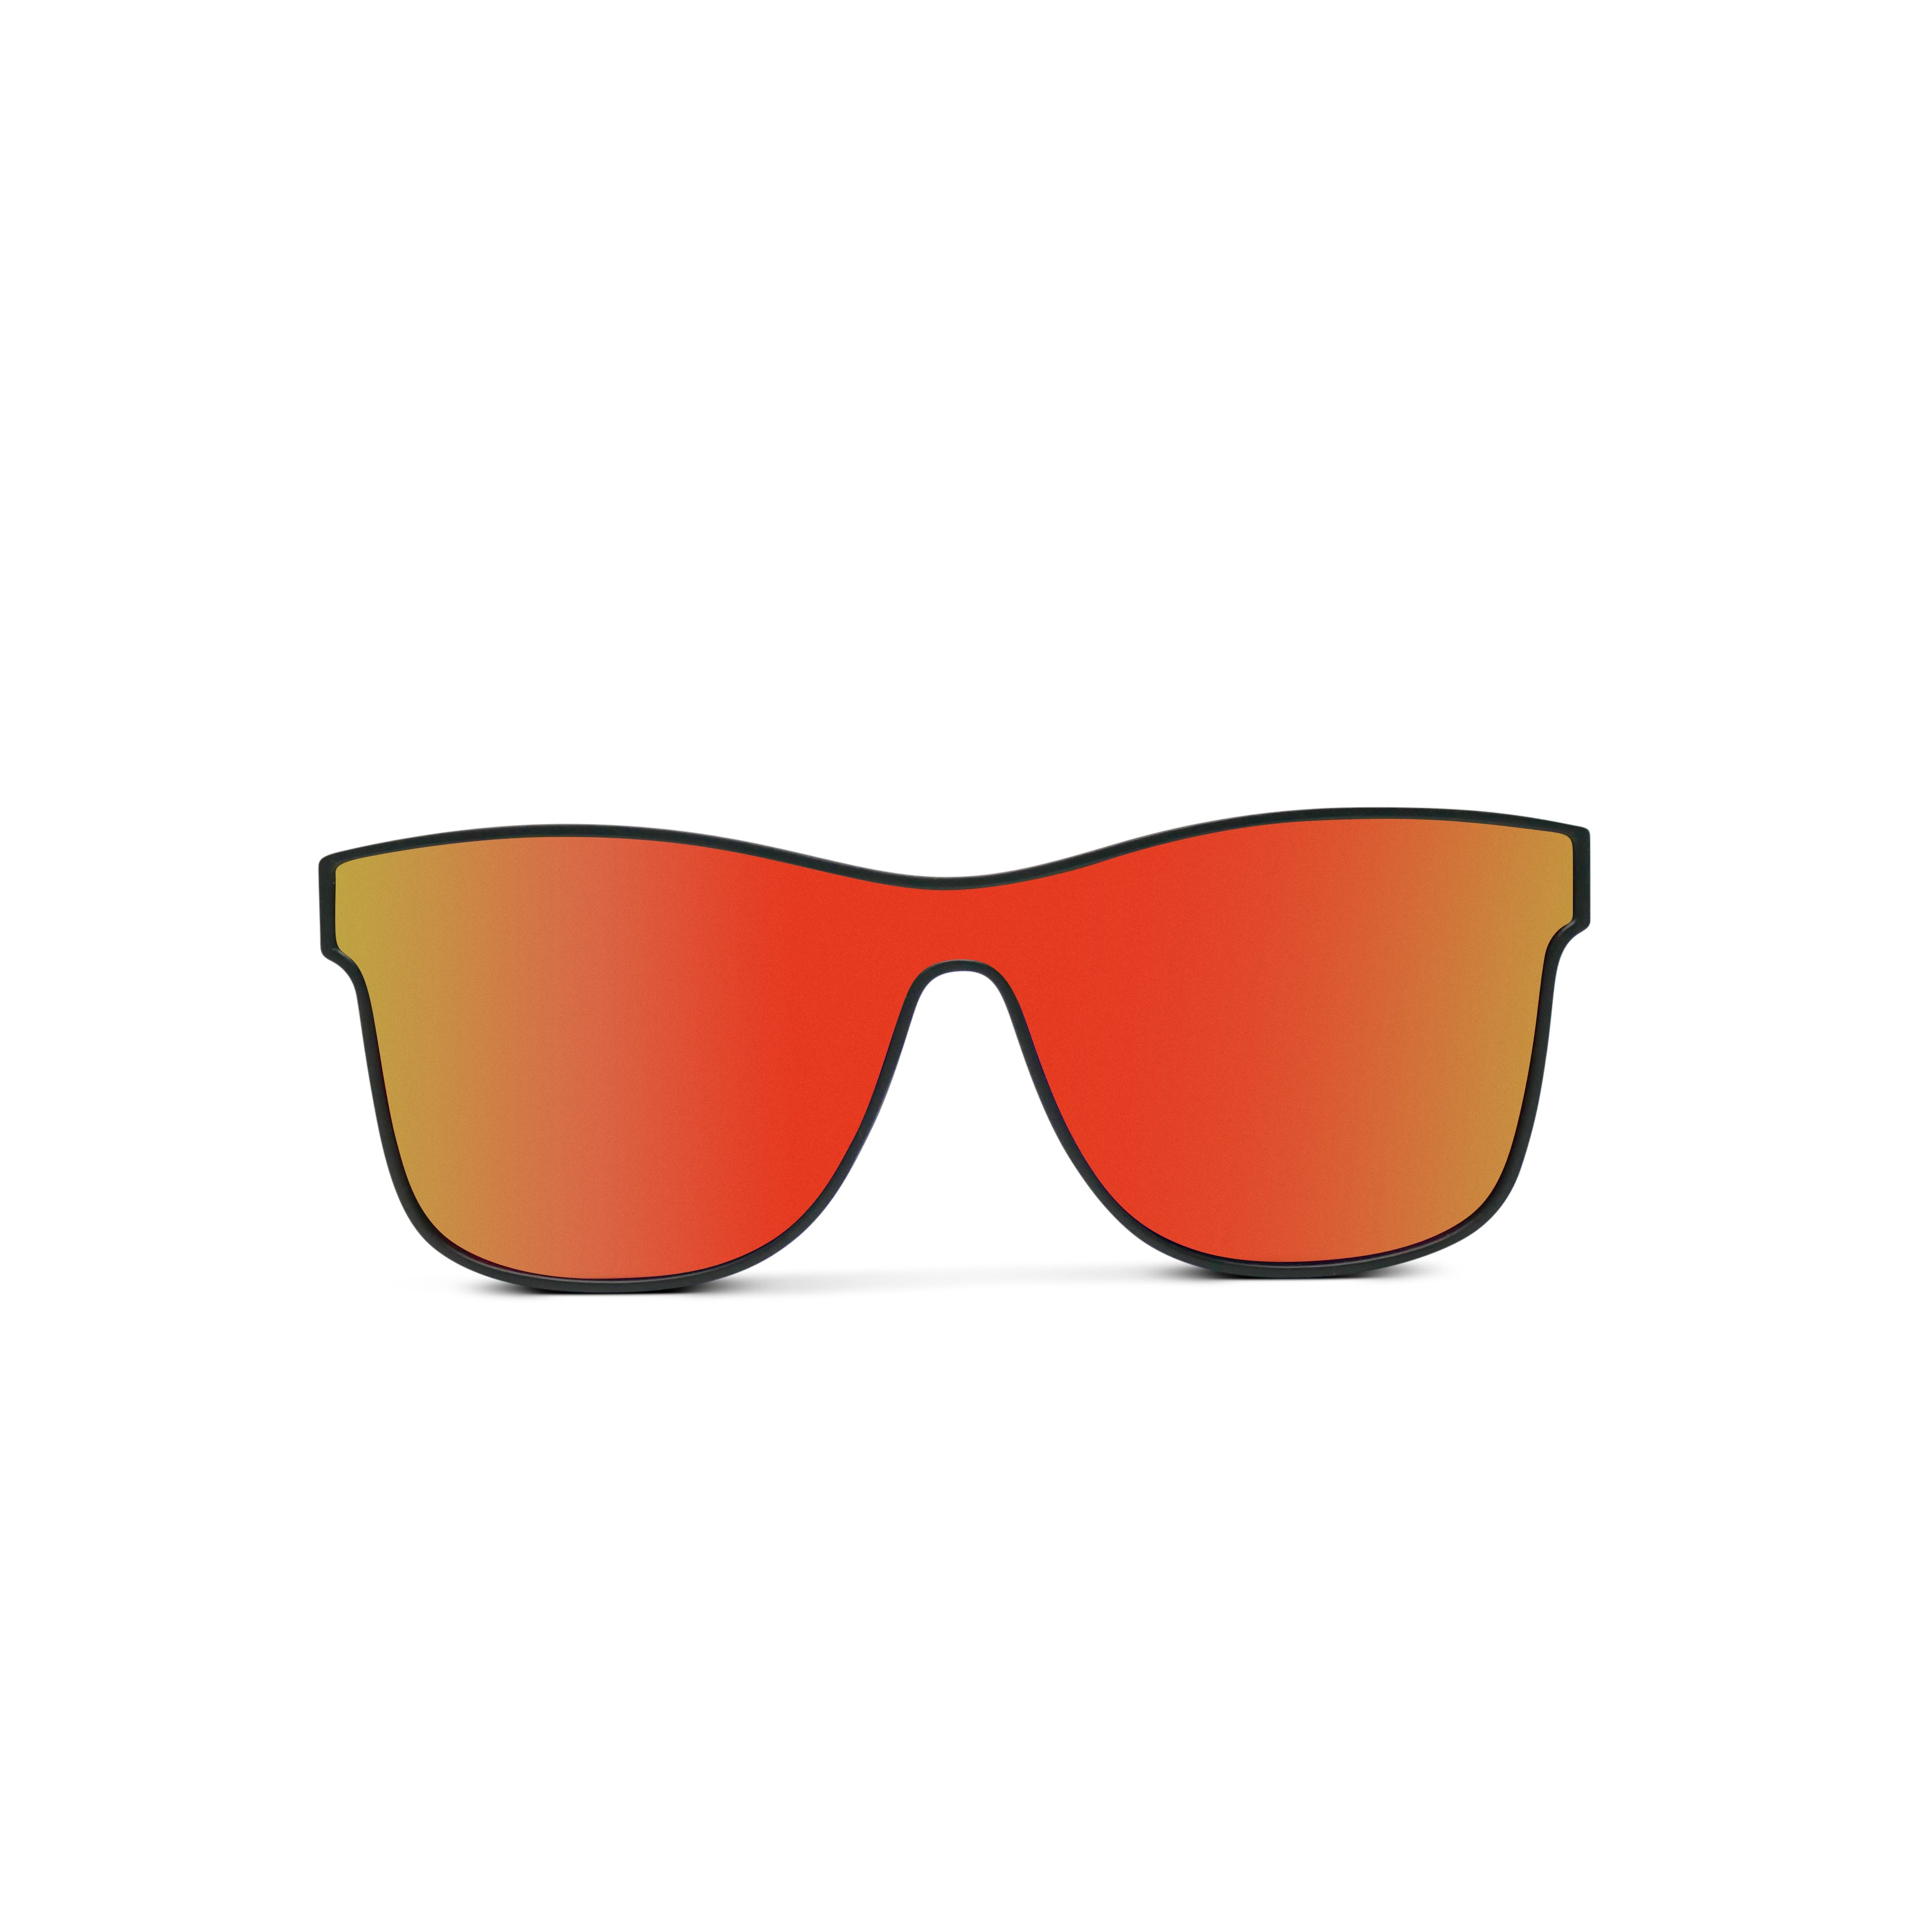 INFINITY - BLACK FRAME | MULTI COLORED PURLE/RED POLARIZED LENS